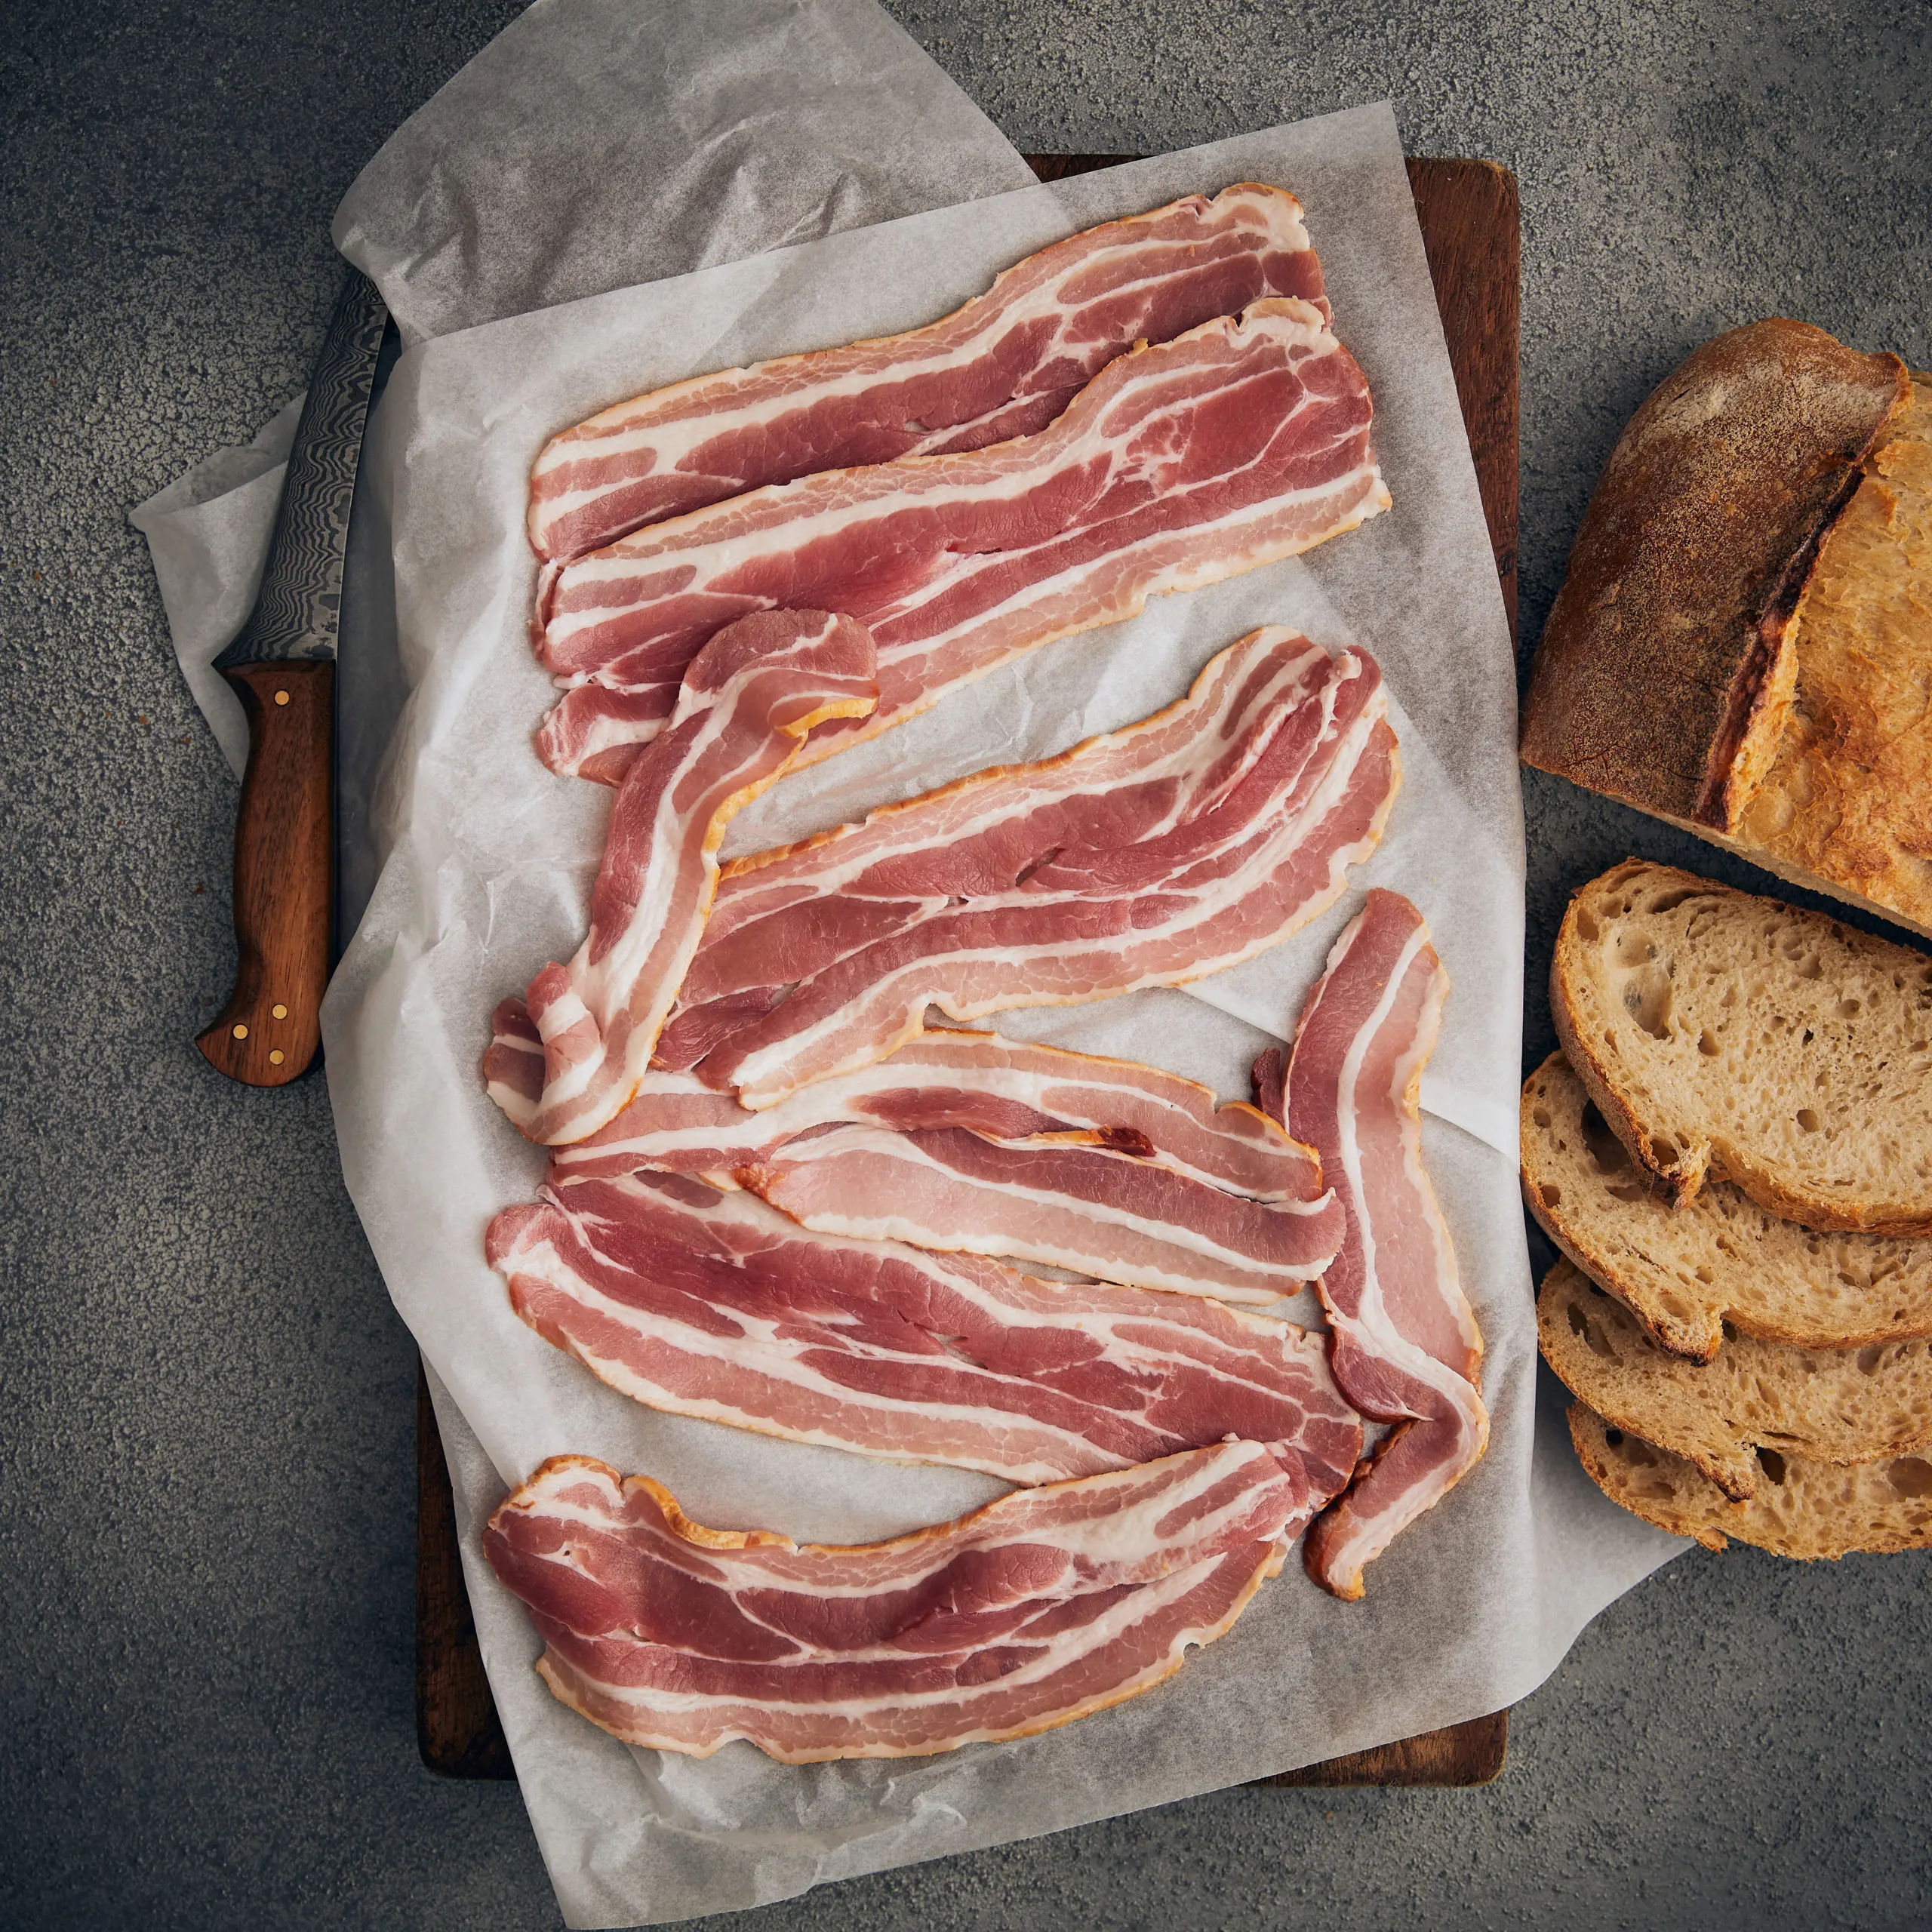 smoked streaky bacon - What is smoked streaky bacon